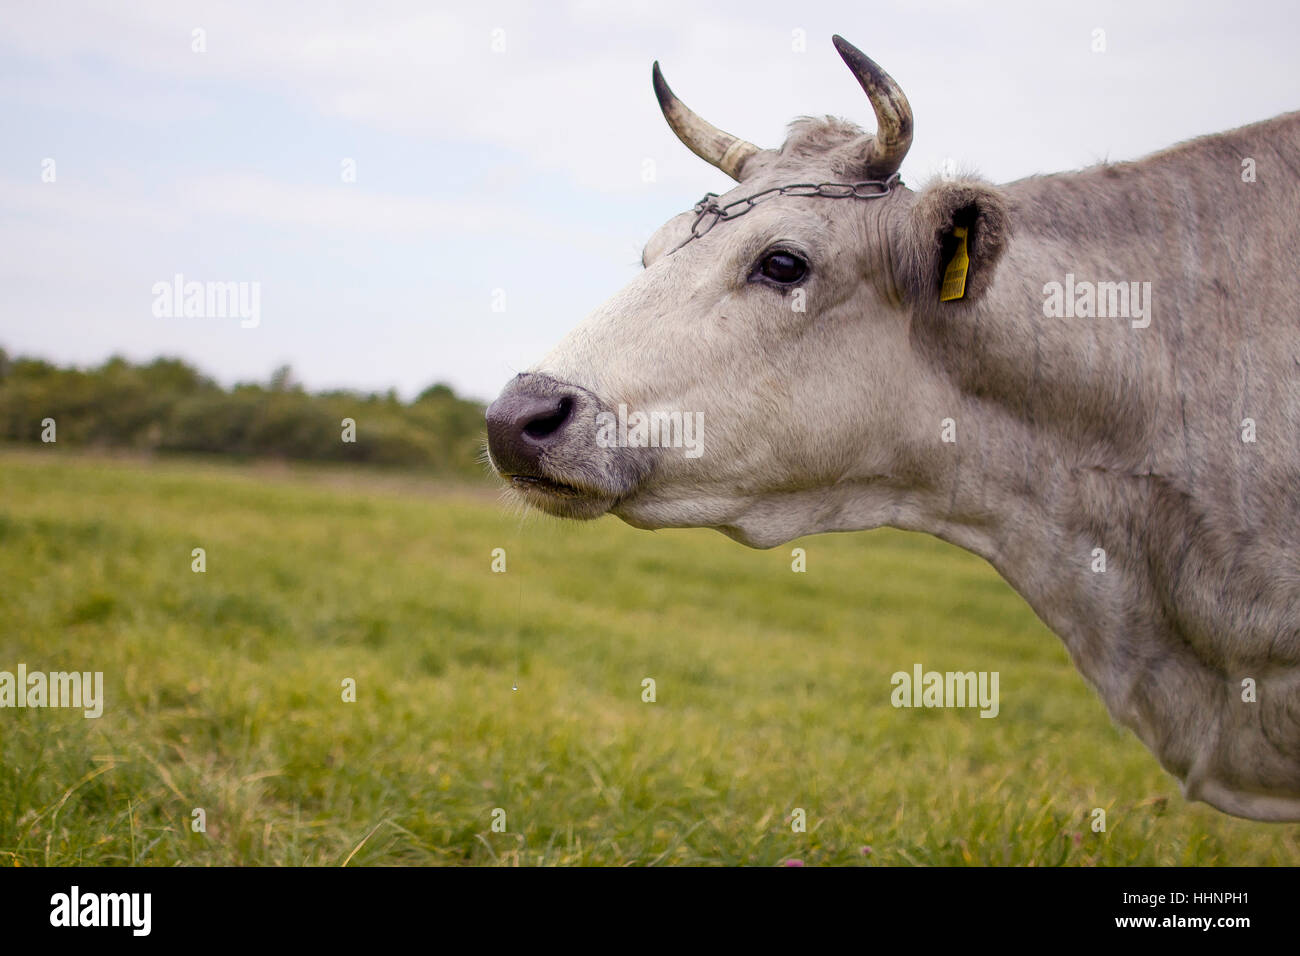 Cow in Lithuania Stock Photo